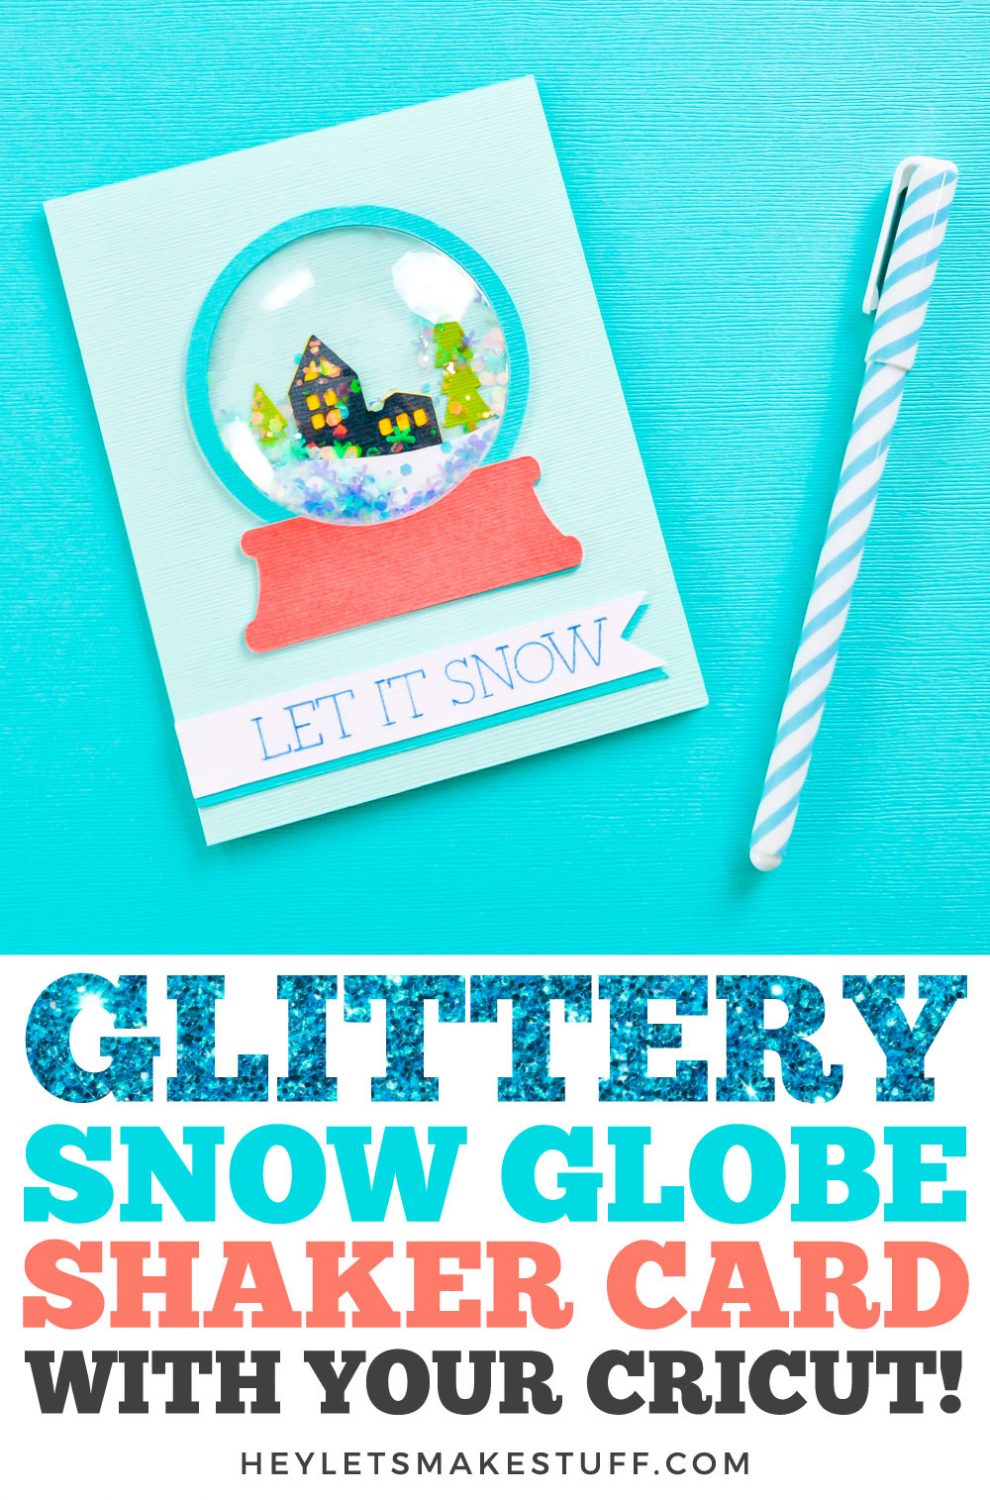 Glittery Snow Globe Shaker Card with Your Cricut pin image.